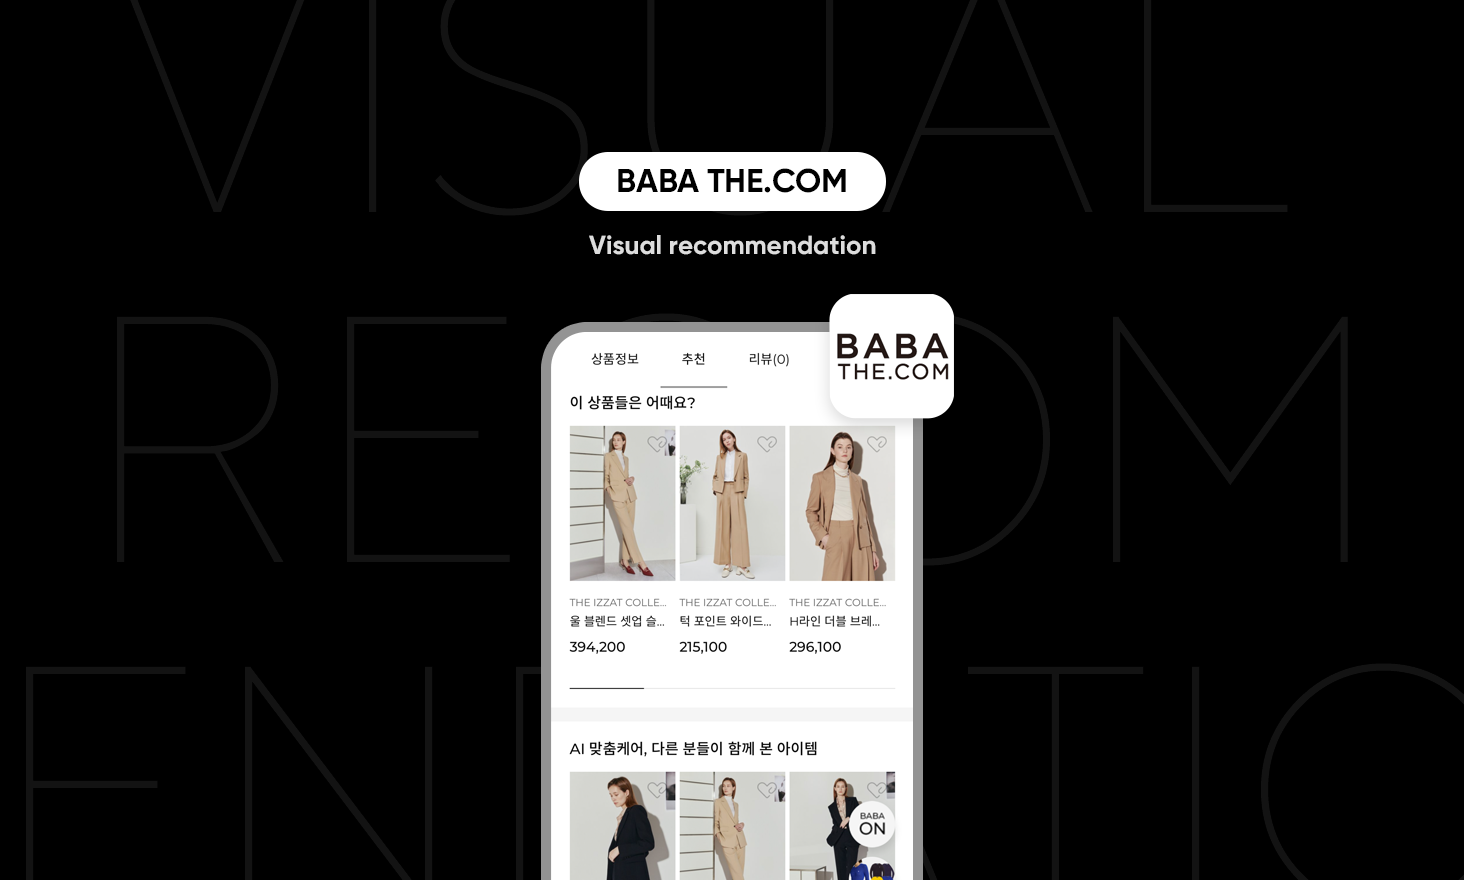 Babathe.com’s know-how on how they expanded their mall and achieved 300% revenue.